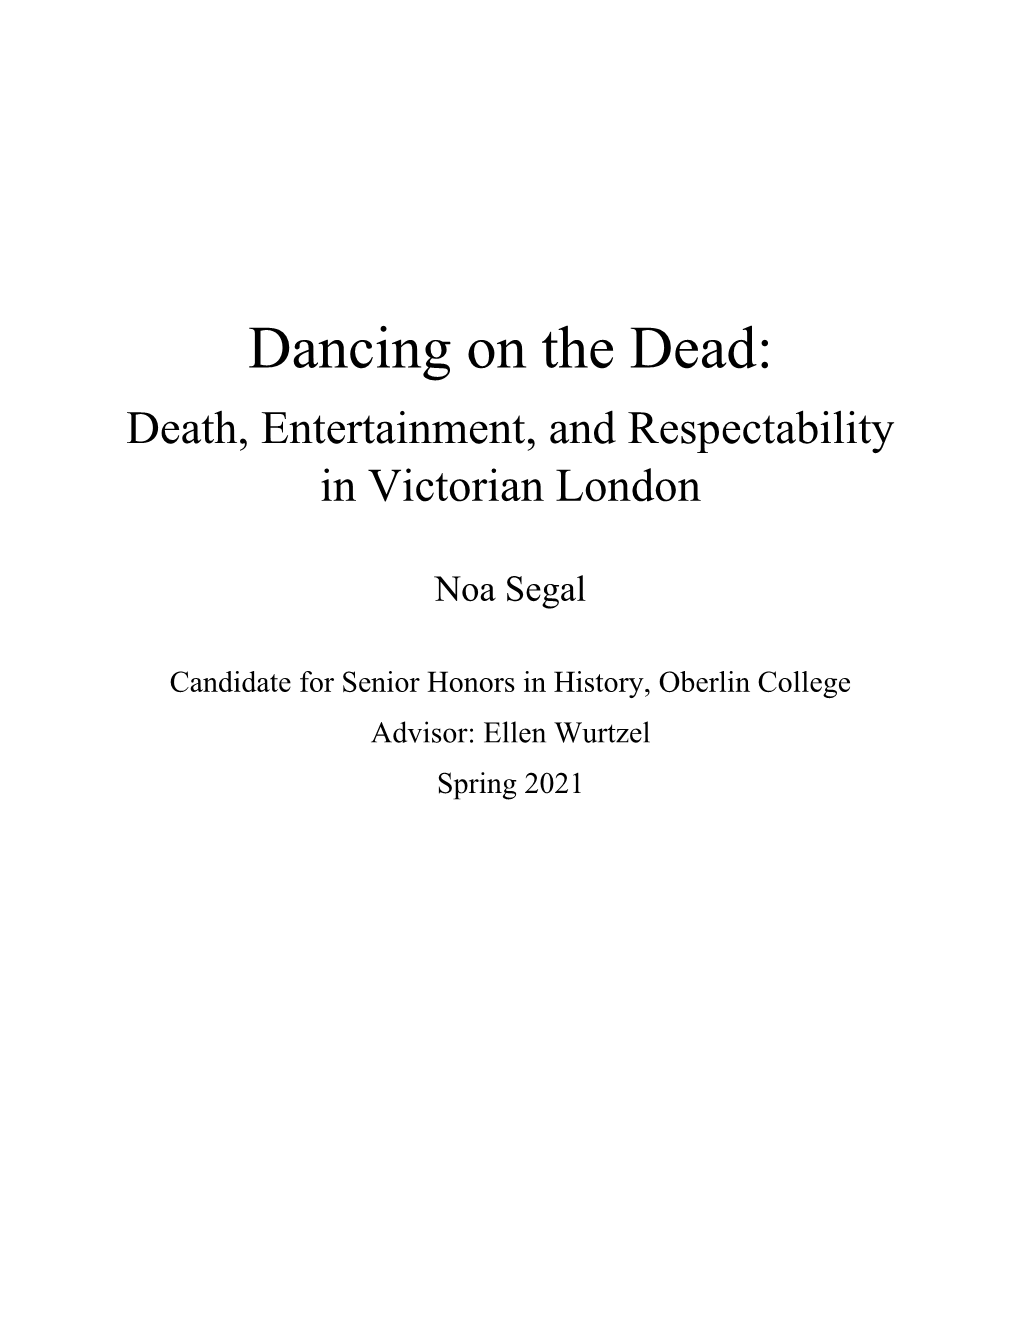 Death, Entertainment, and Respectability in Victorian London